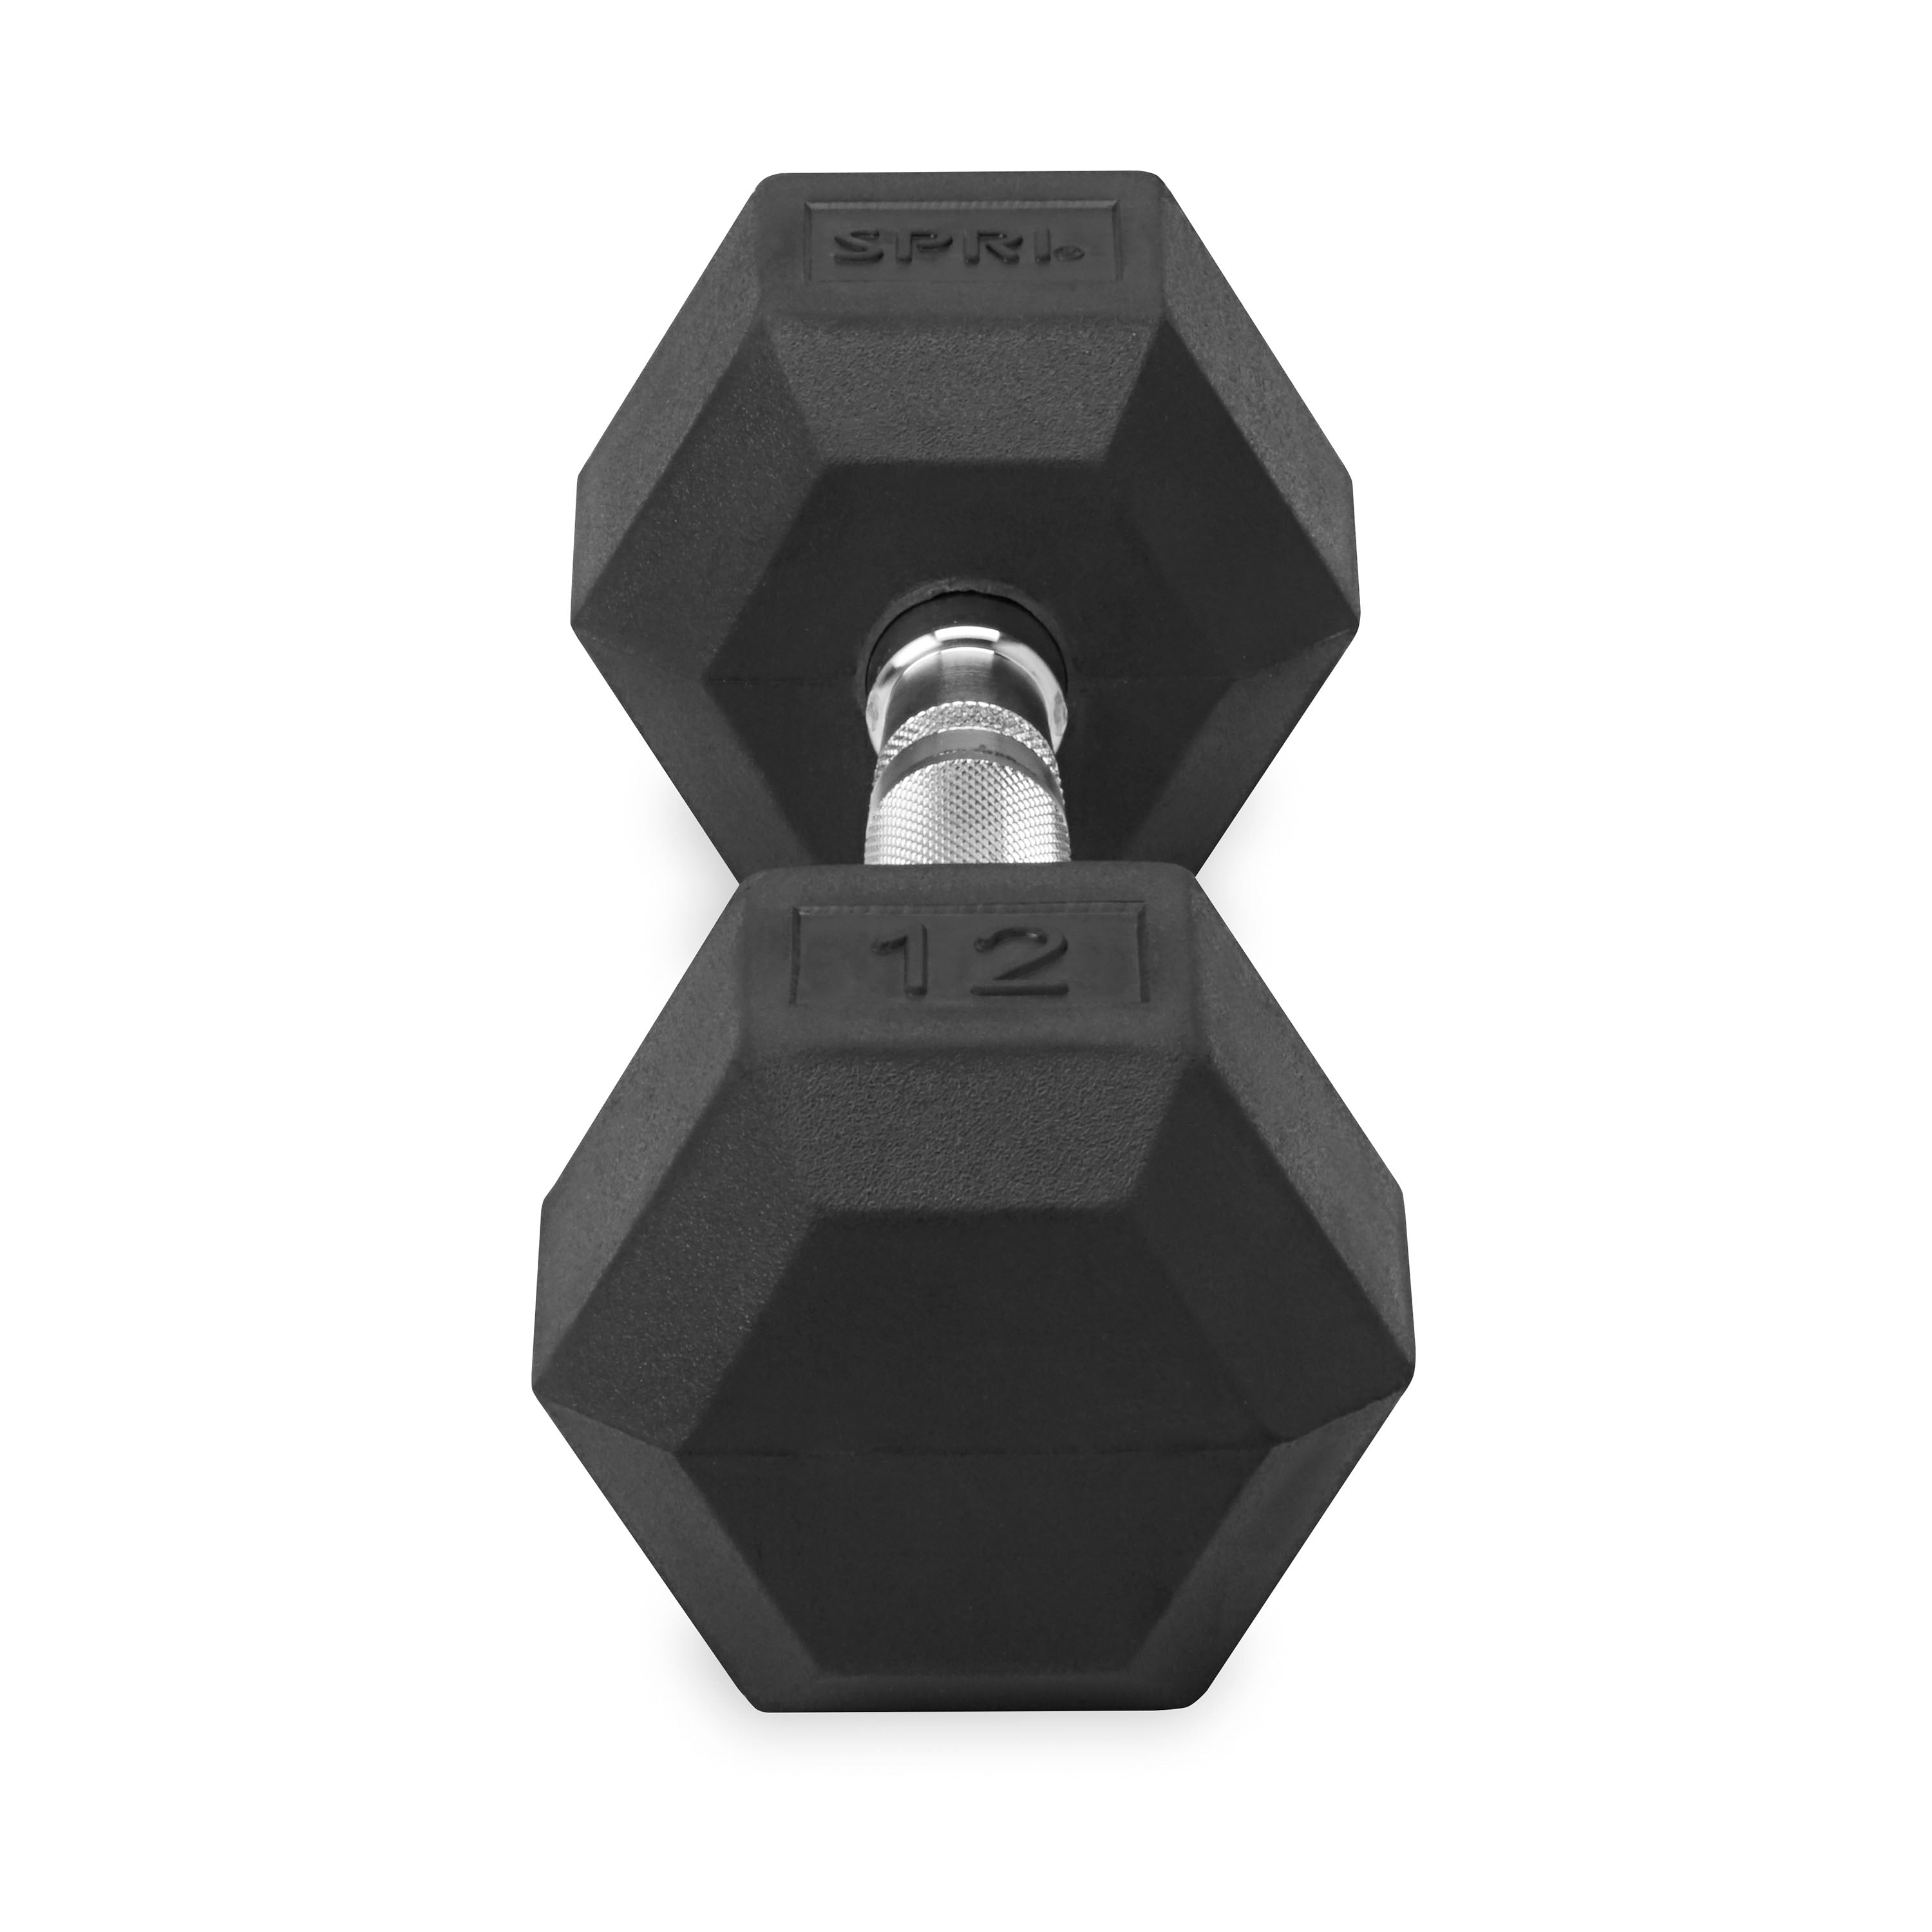 Deluxe 6-Sided Rubber Dumbbells - 3-25 lb. Pairs